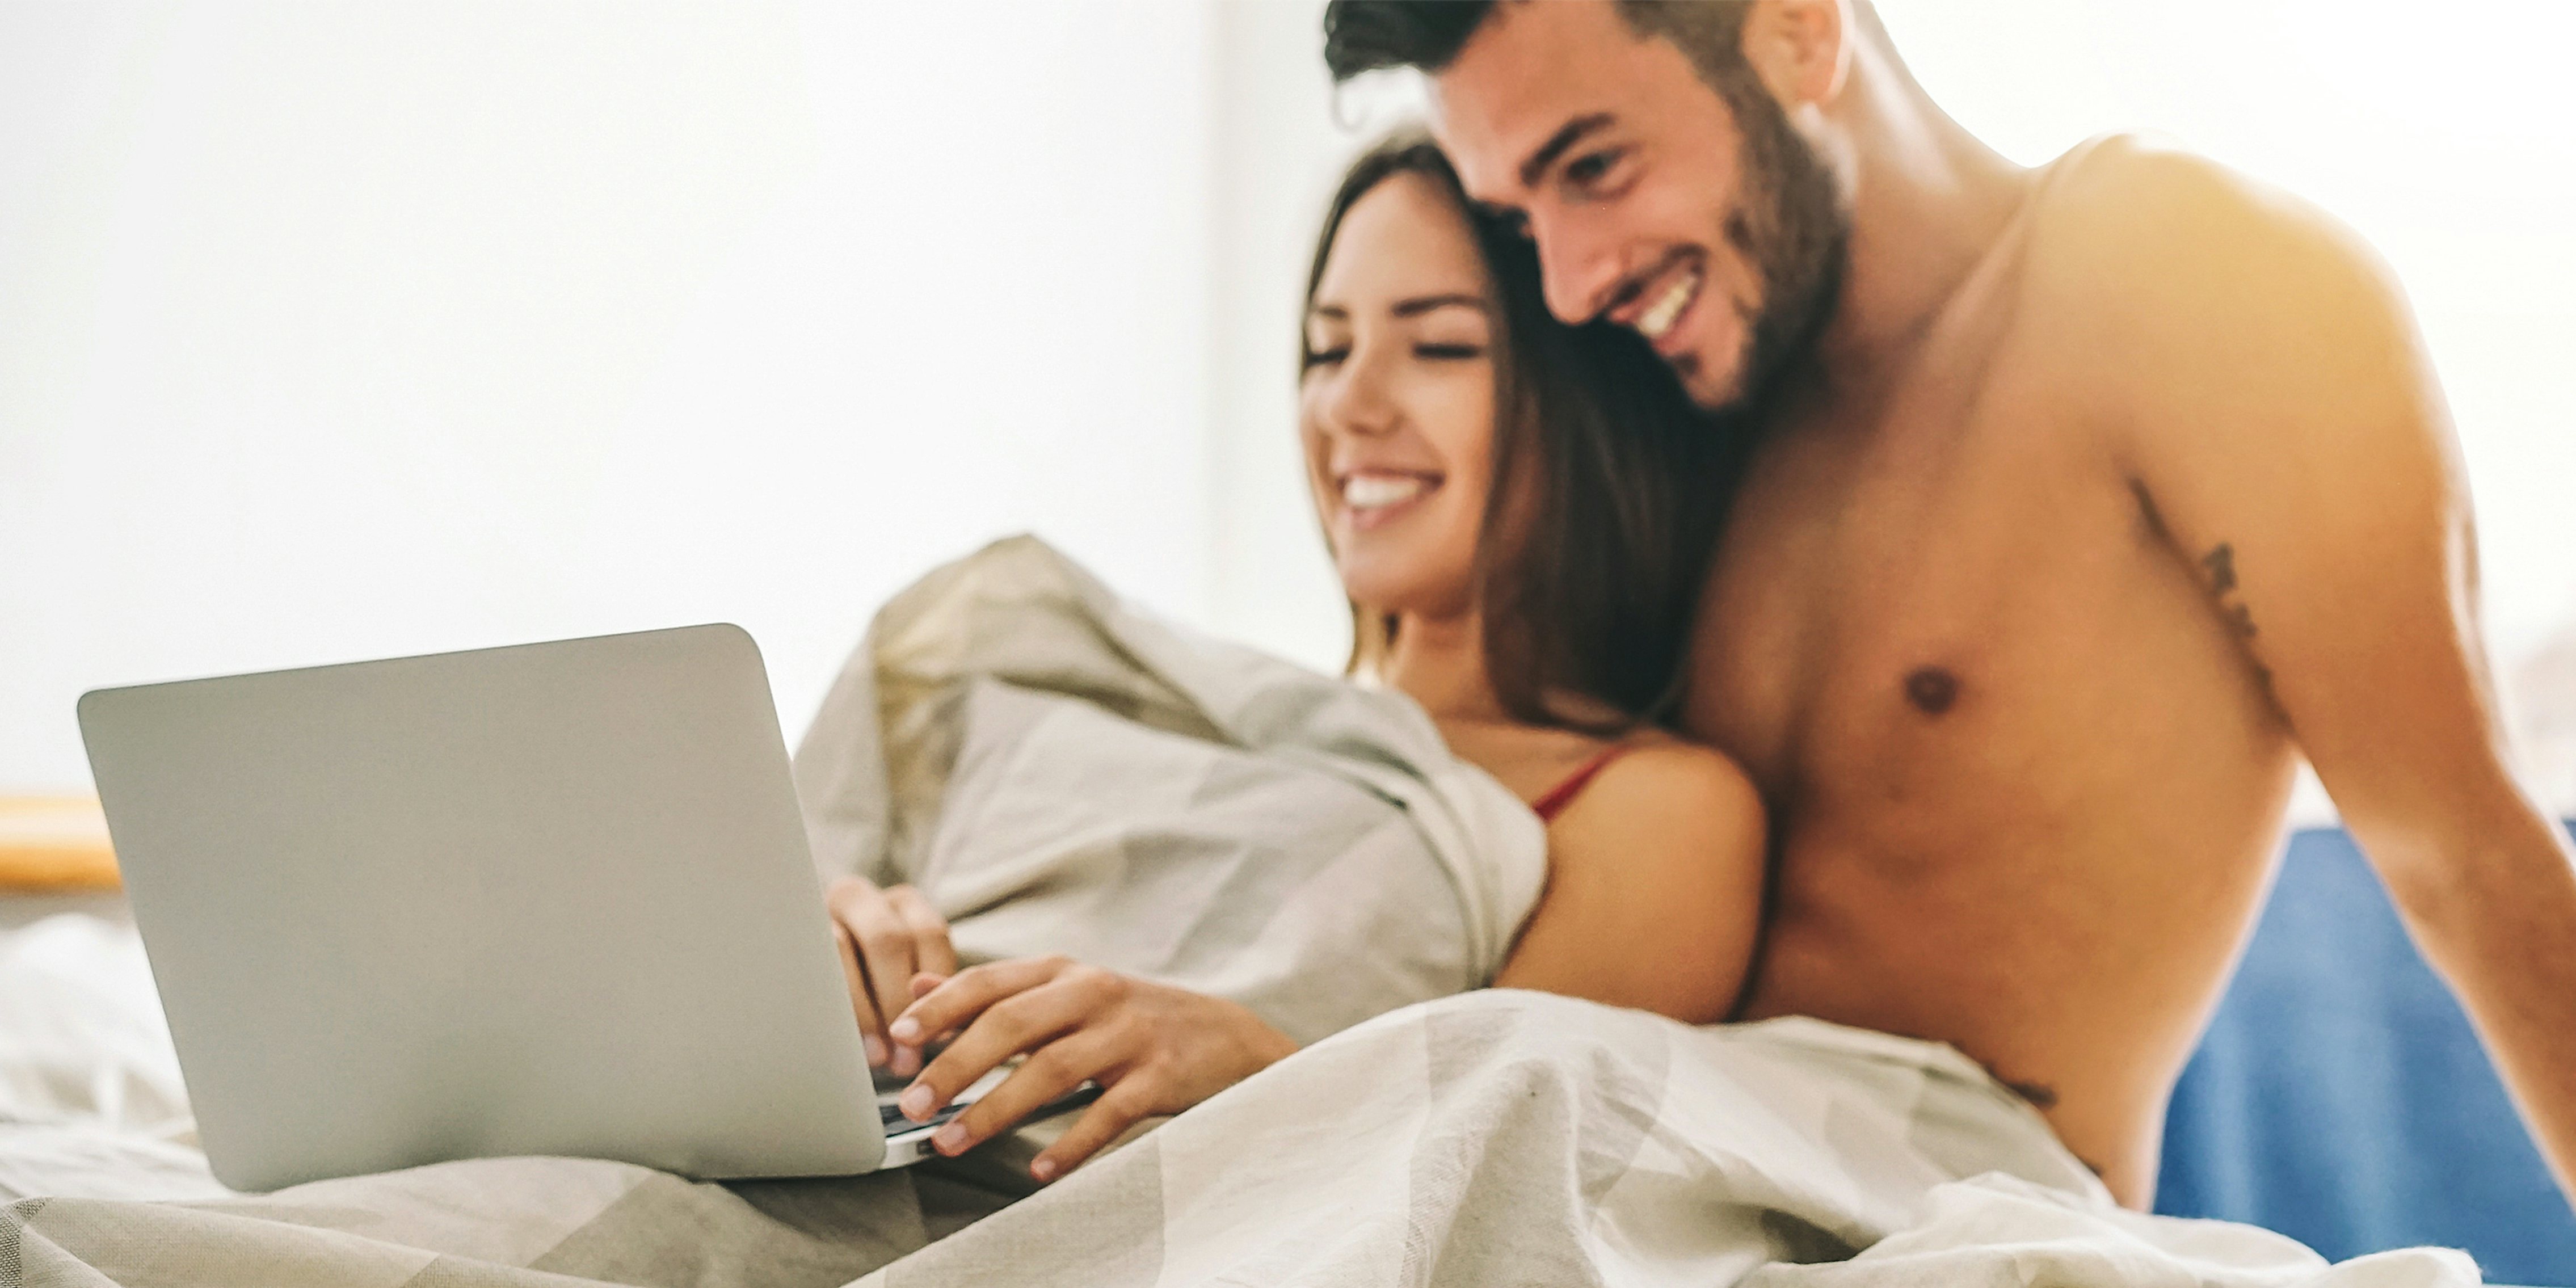 Pron Videos Download 10 Minutes High Quality - Porn For Couples: The Best Couple Porn to Watch and Explore Together